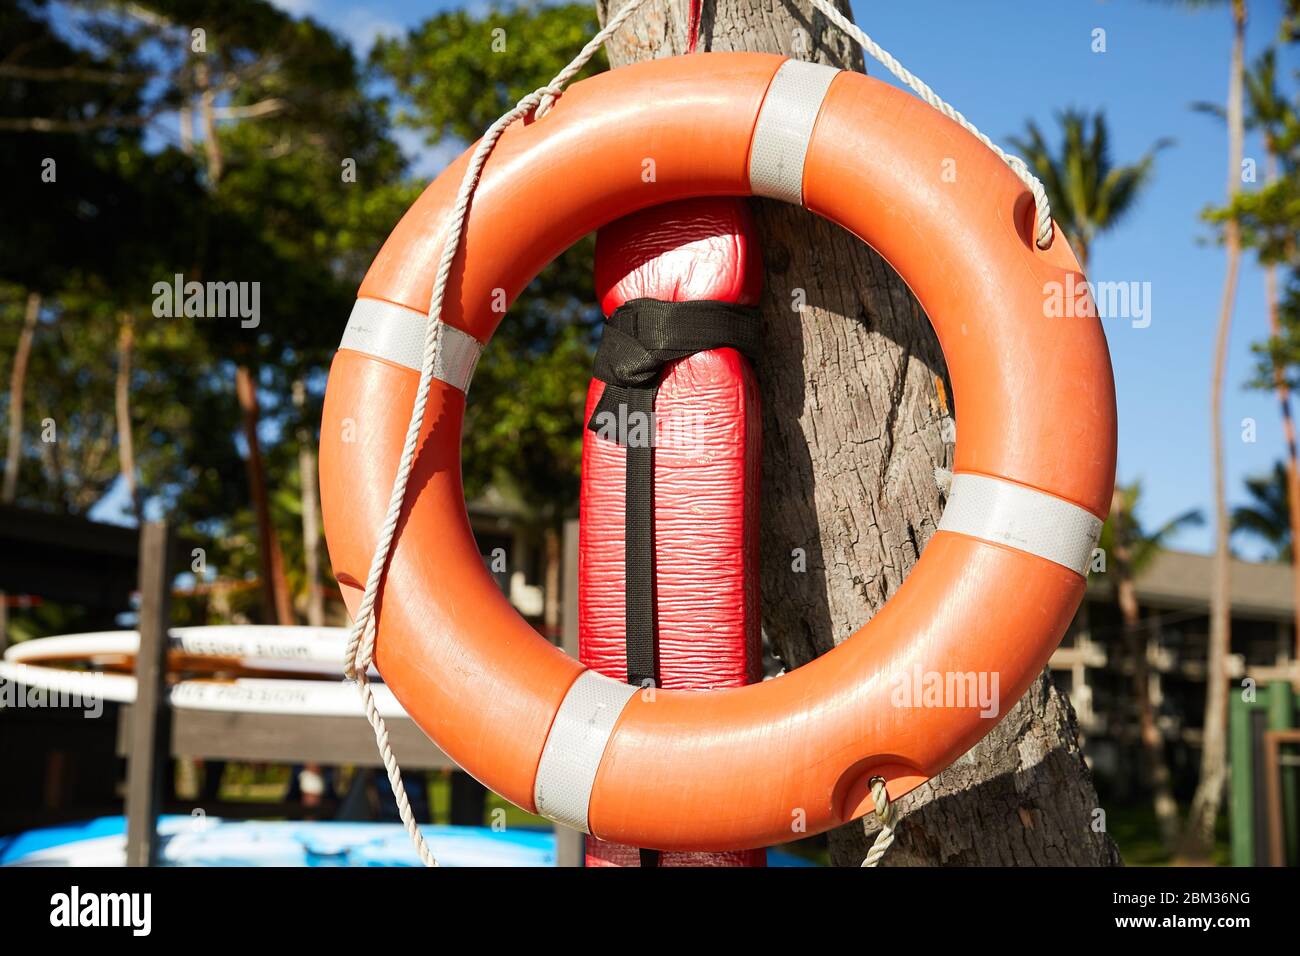 An orange life preserver buoy hangs on a dock with palm trees in the background at a remote island in Fiji Stock Photo